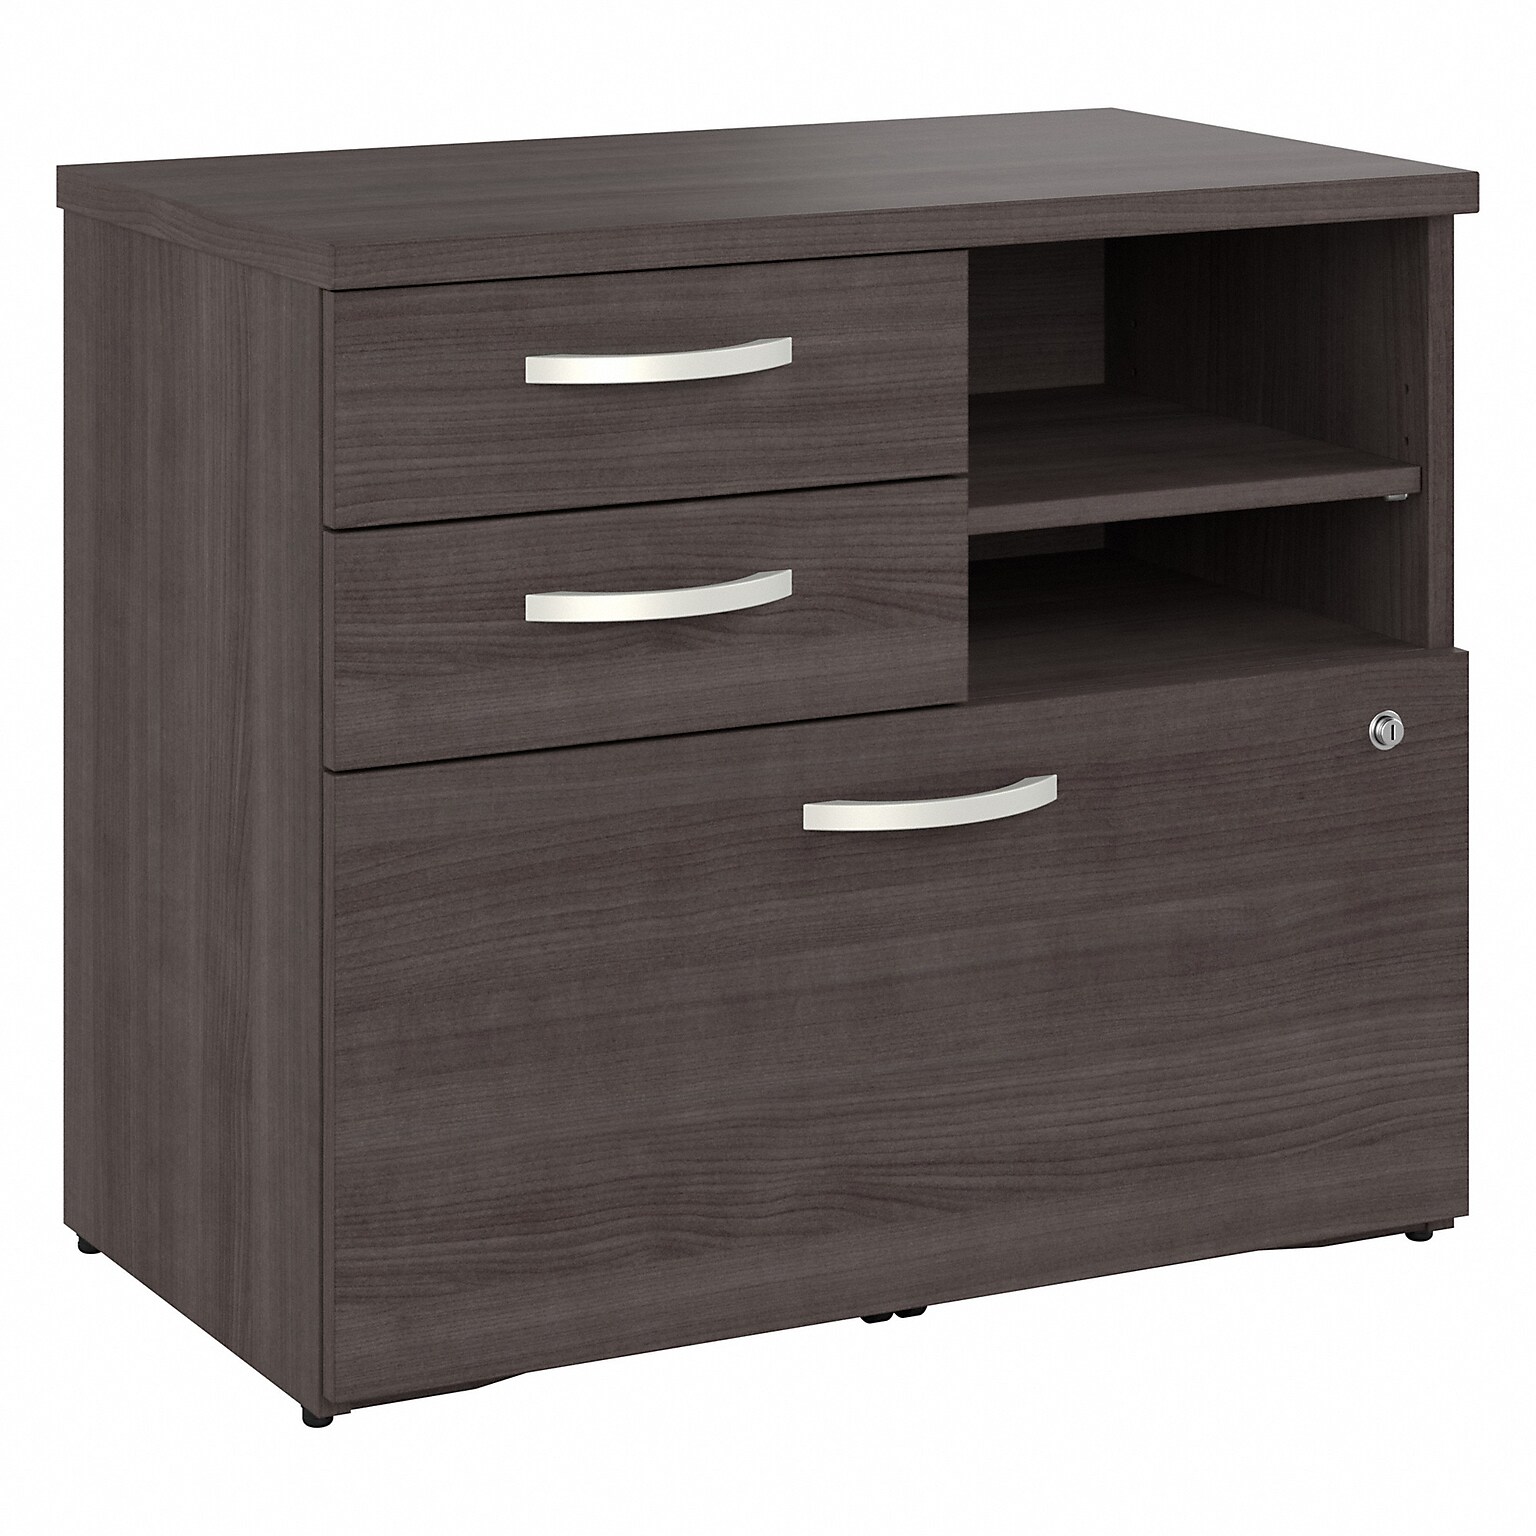 Bush Business Furniture Studio A 26 Office Storage Cabinet with 2 Shelves and Drawers, Storm Gray (SDF130SGSU-Z)